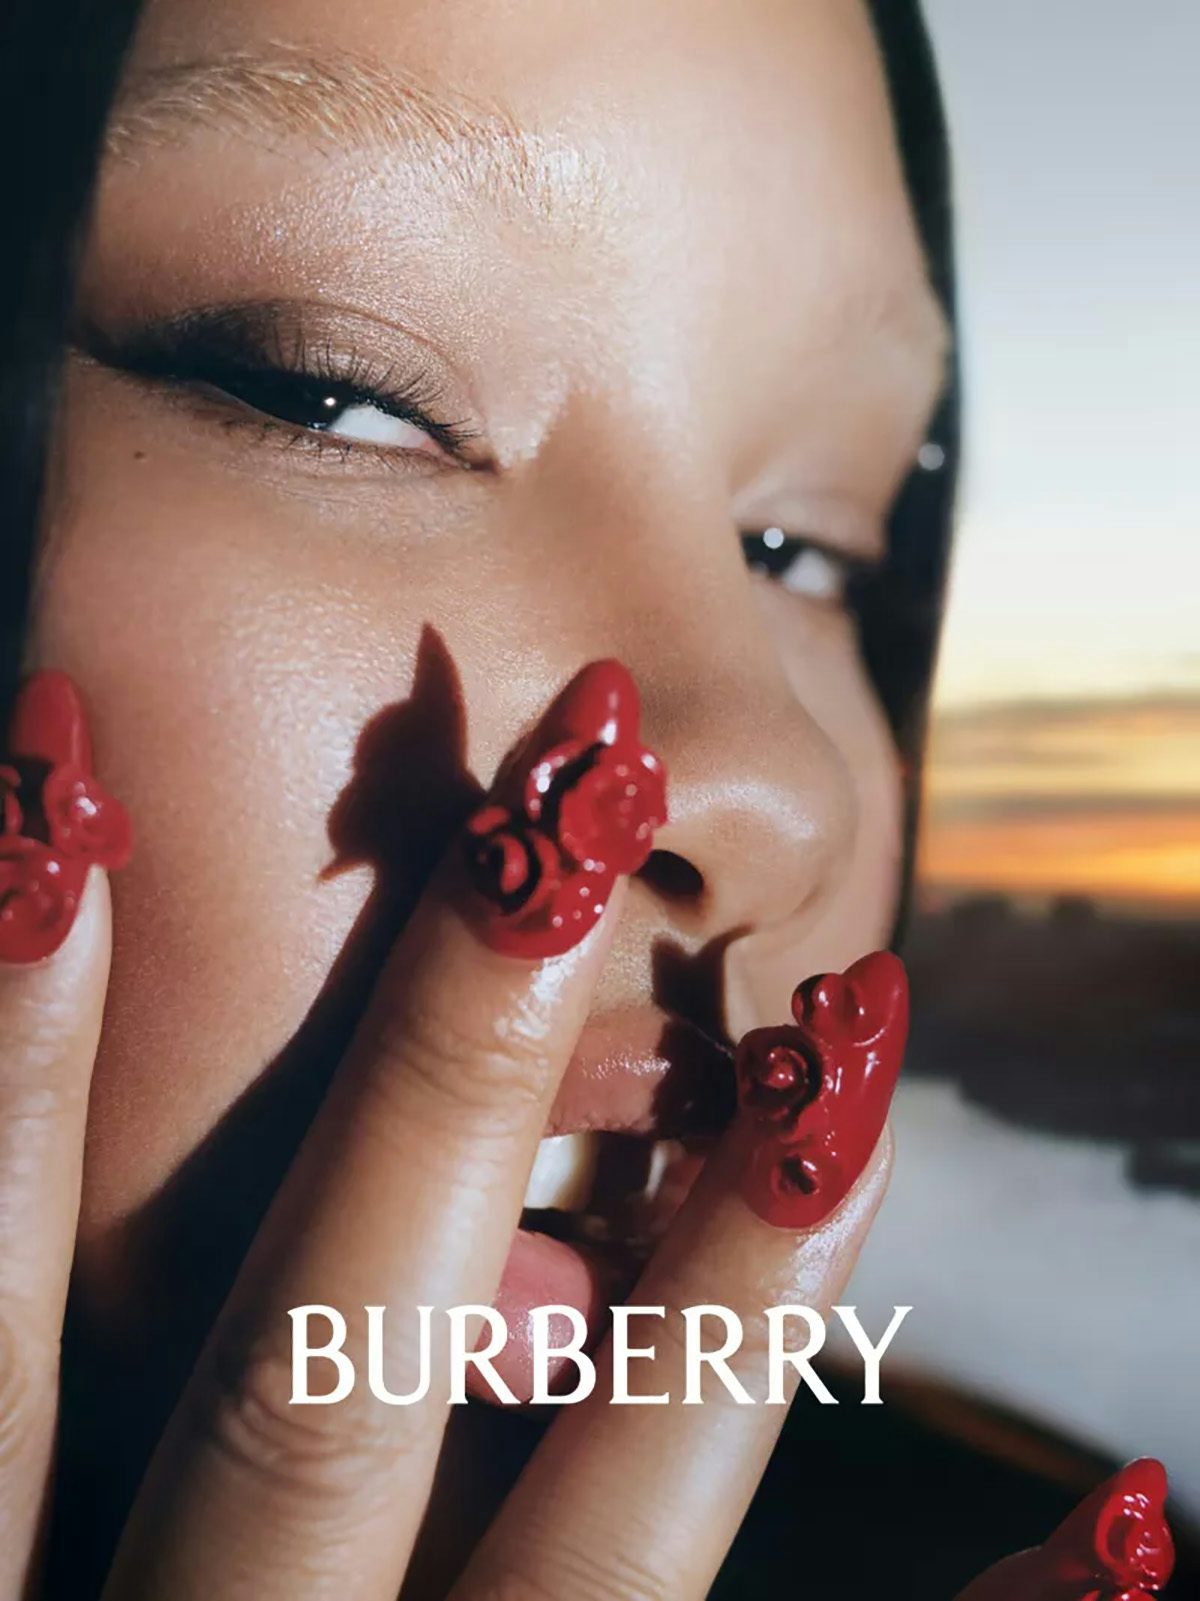 Does Burberry's redesign signal a new chapter for 'British' symbolism?